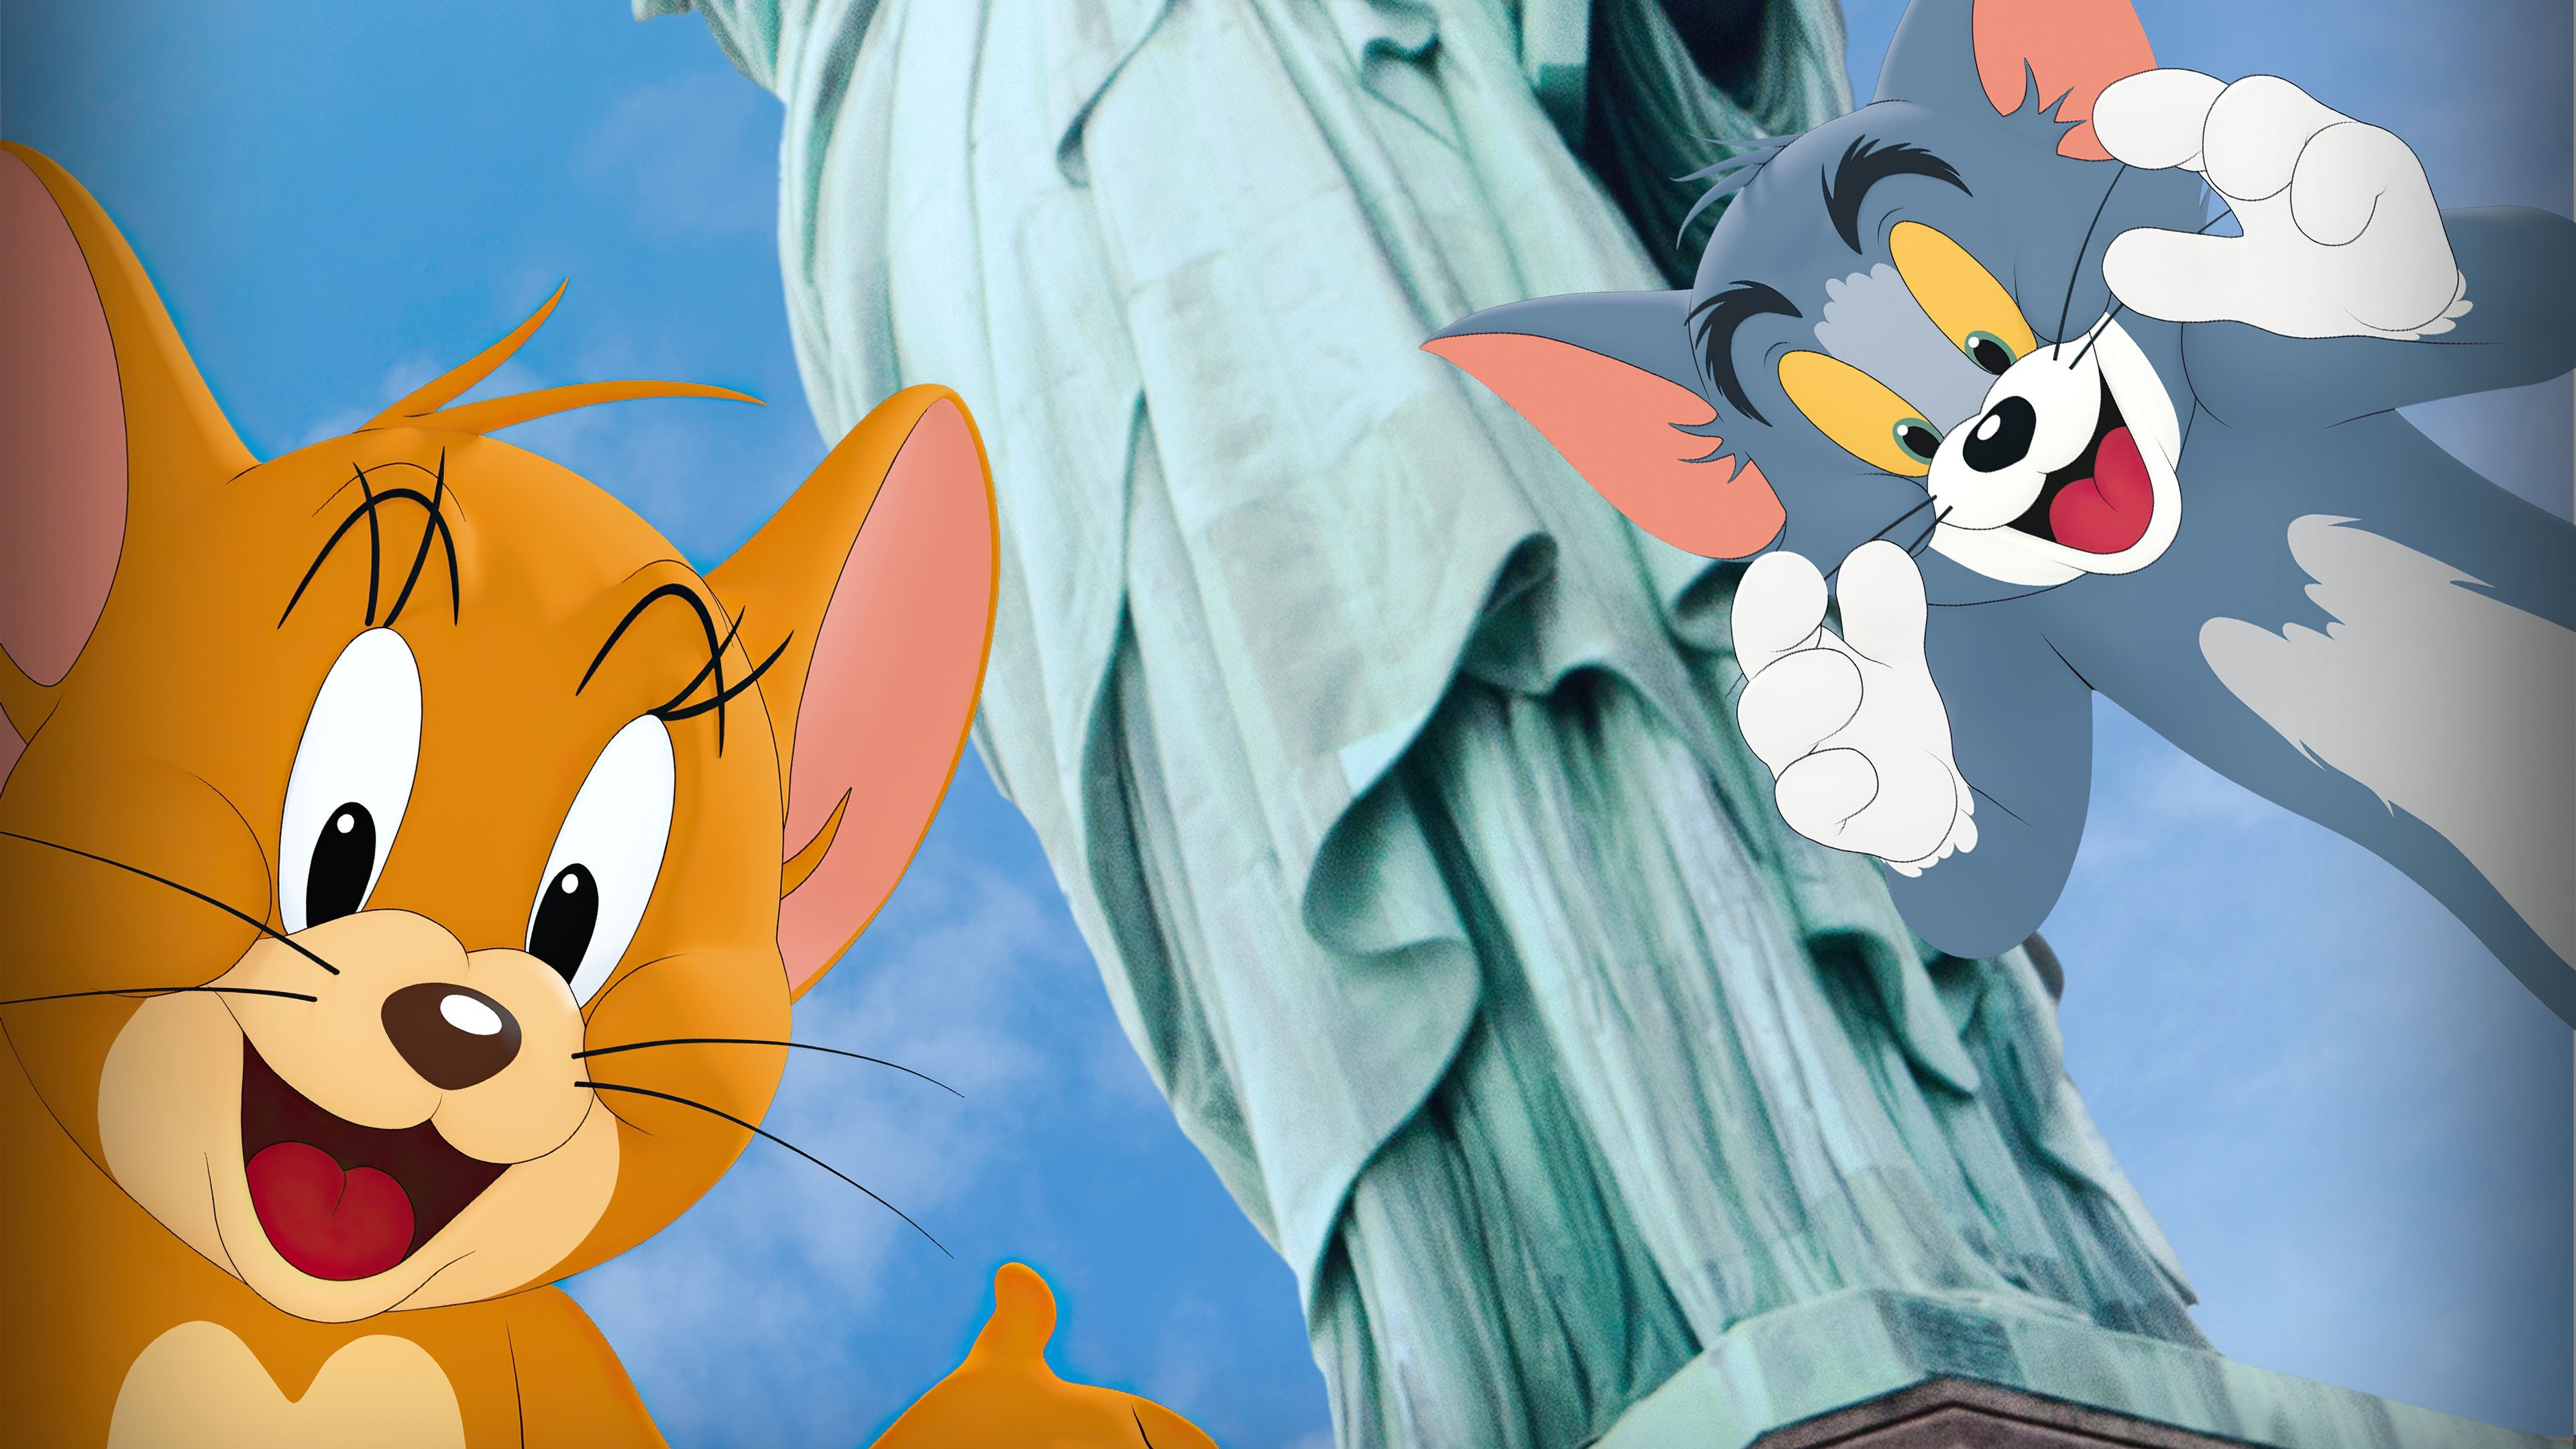 Wallpaper 4k Tom And Jerry 2021 4k Tom And Jerry 2021 4k wallpaper